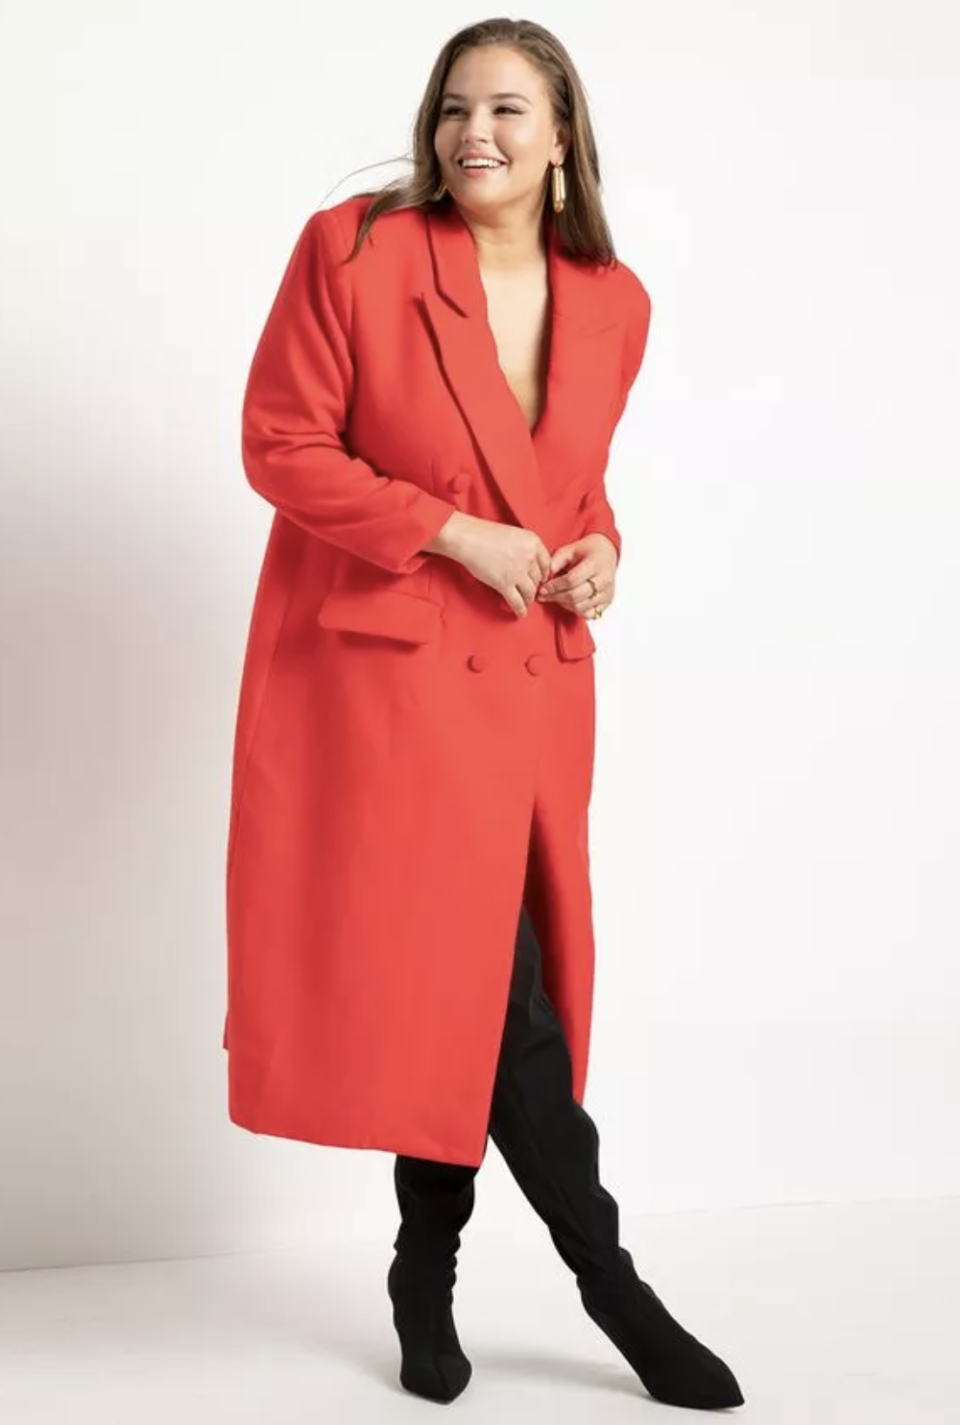 plus size model in black boots and red Strong Shoulder Coat With Cinched Waist (Photo via Eloquii)